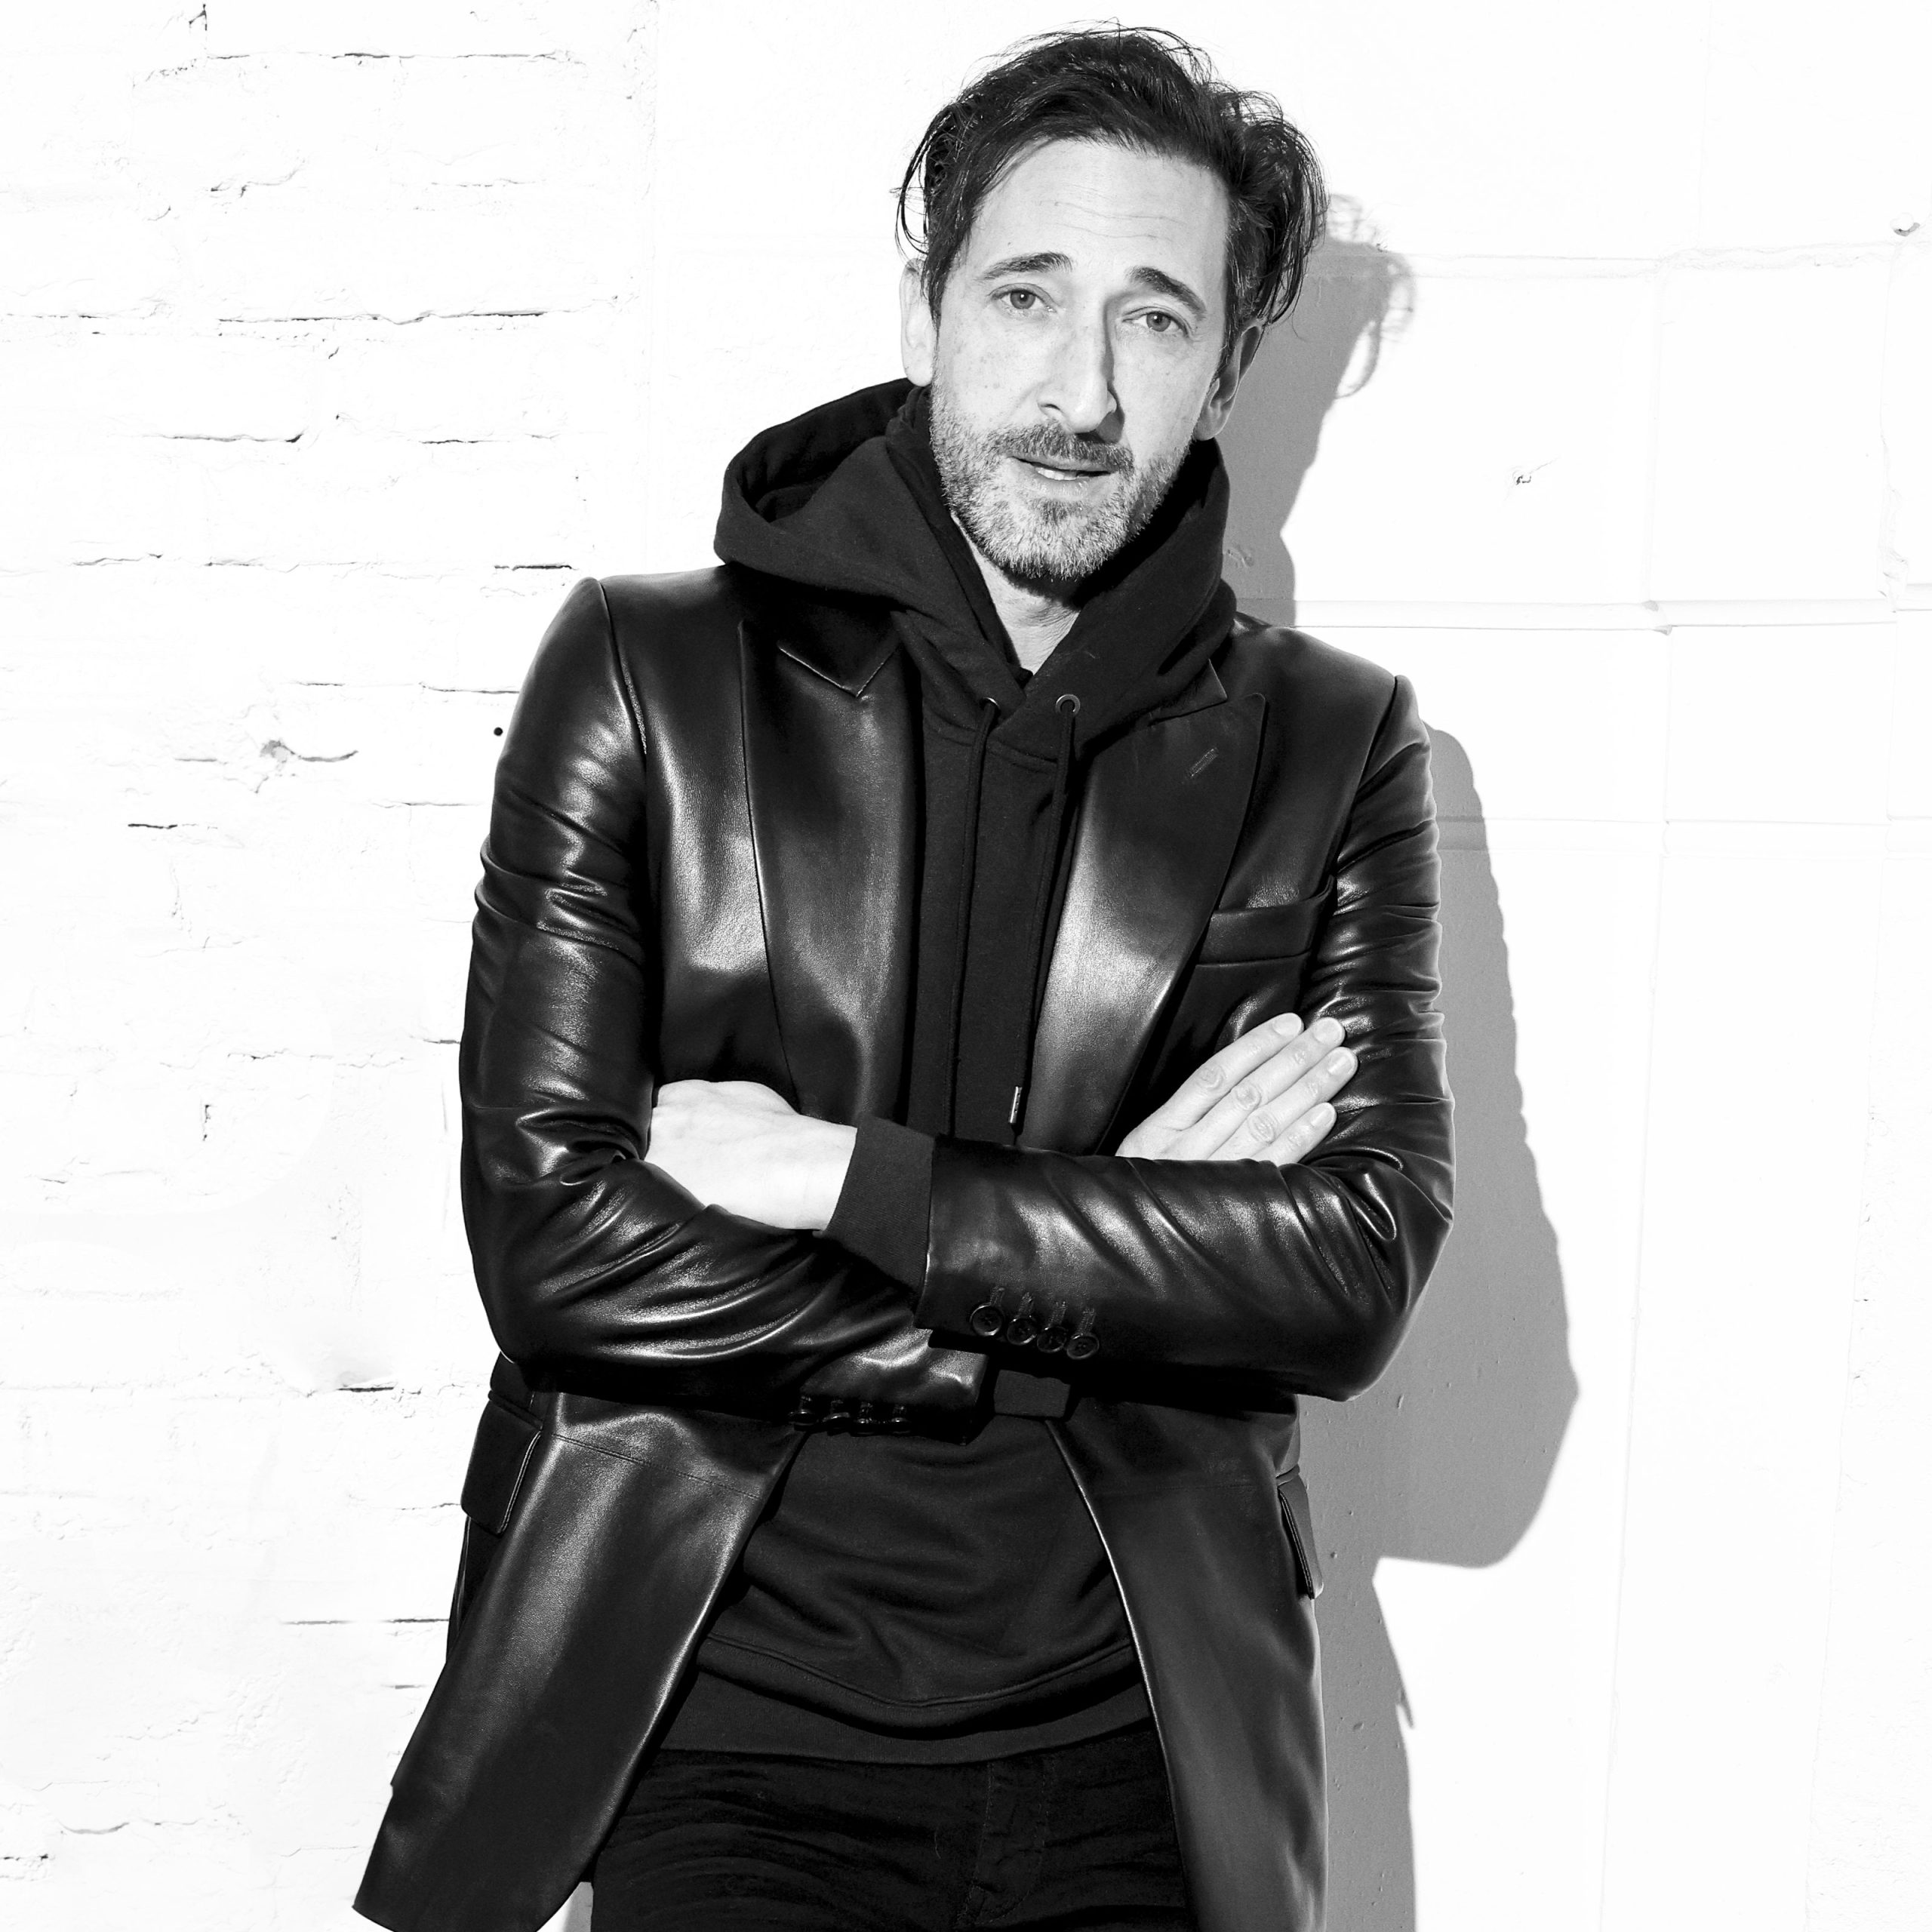 Bally Collaborates with Adrien Brody